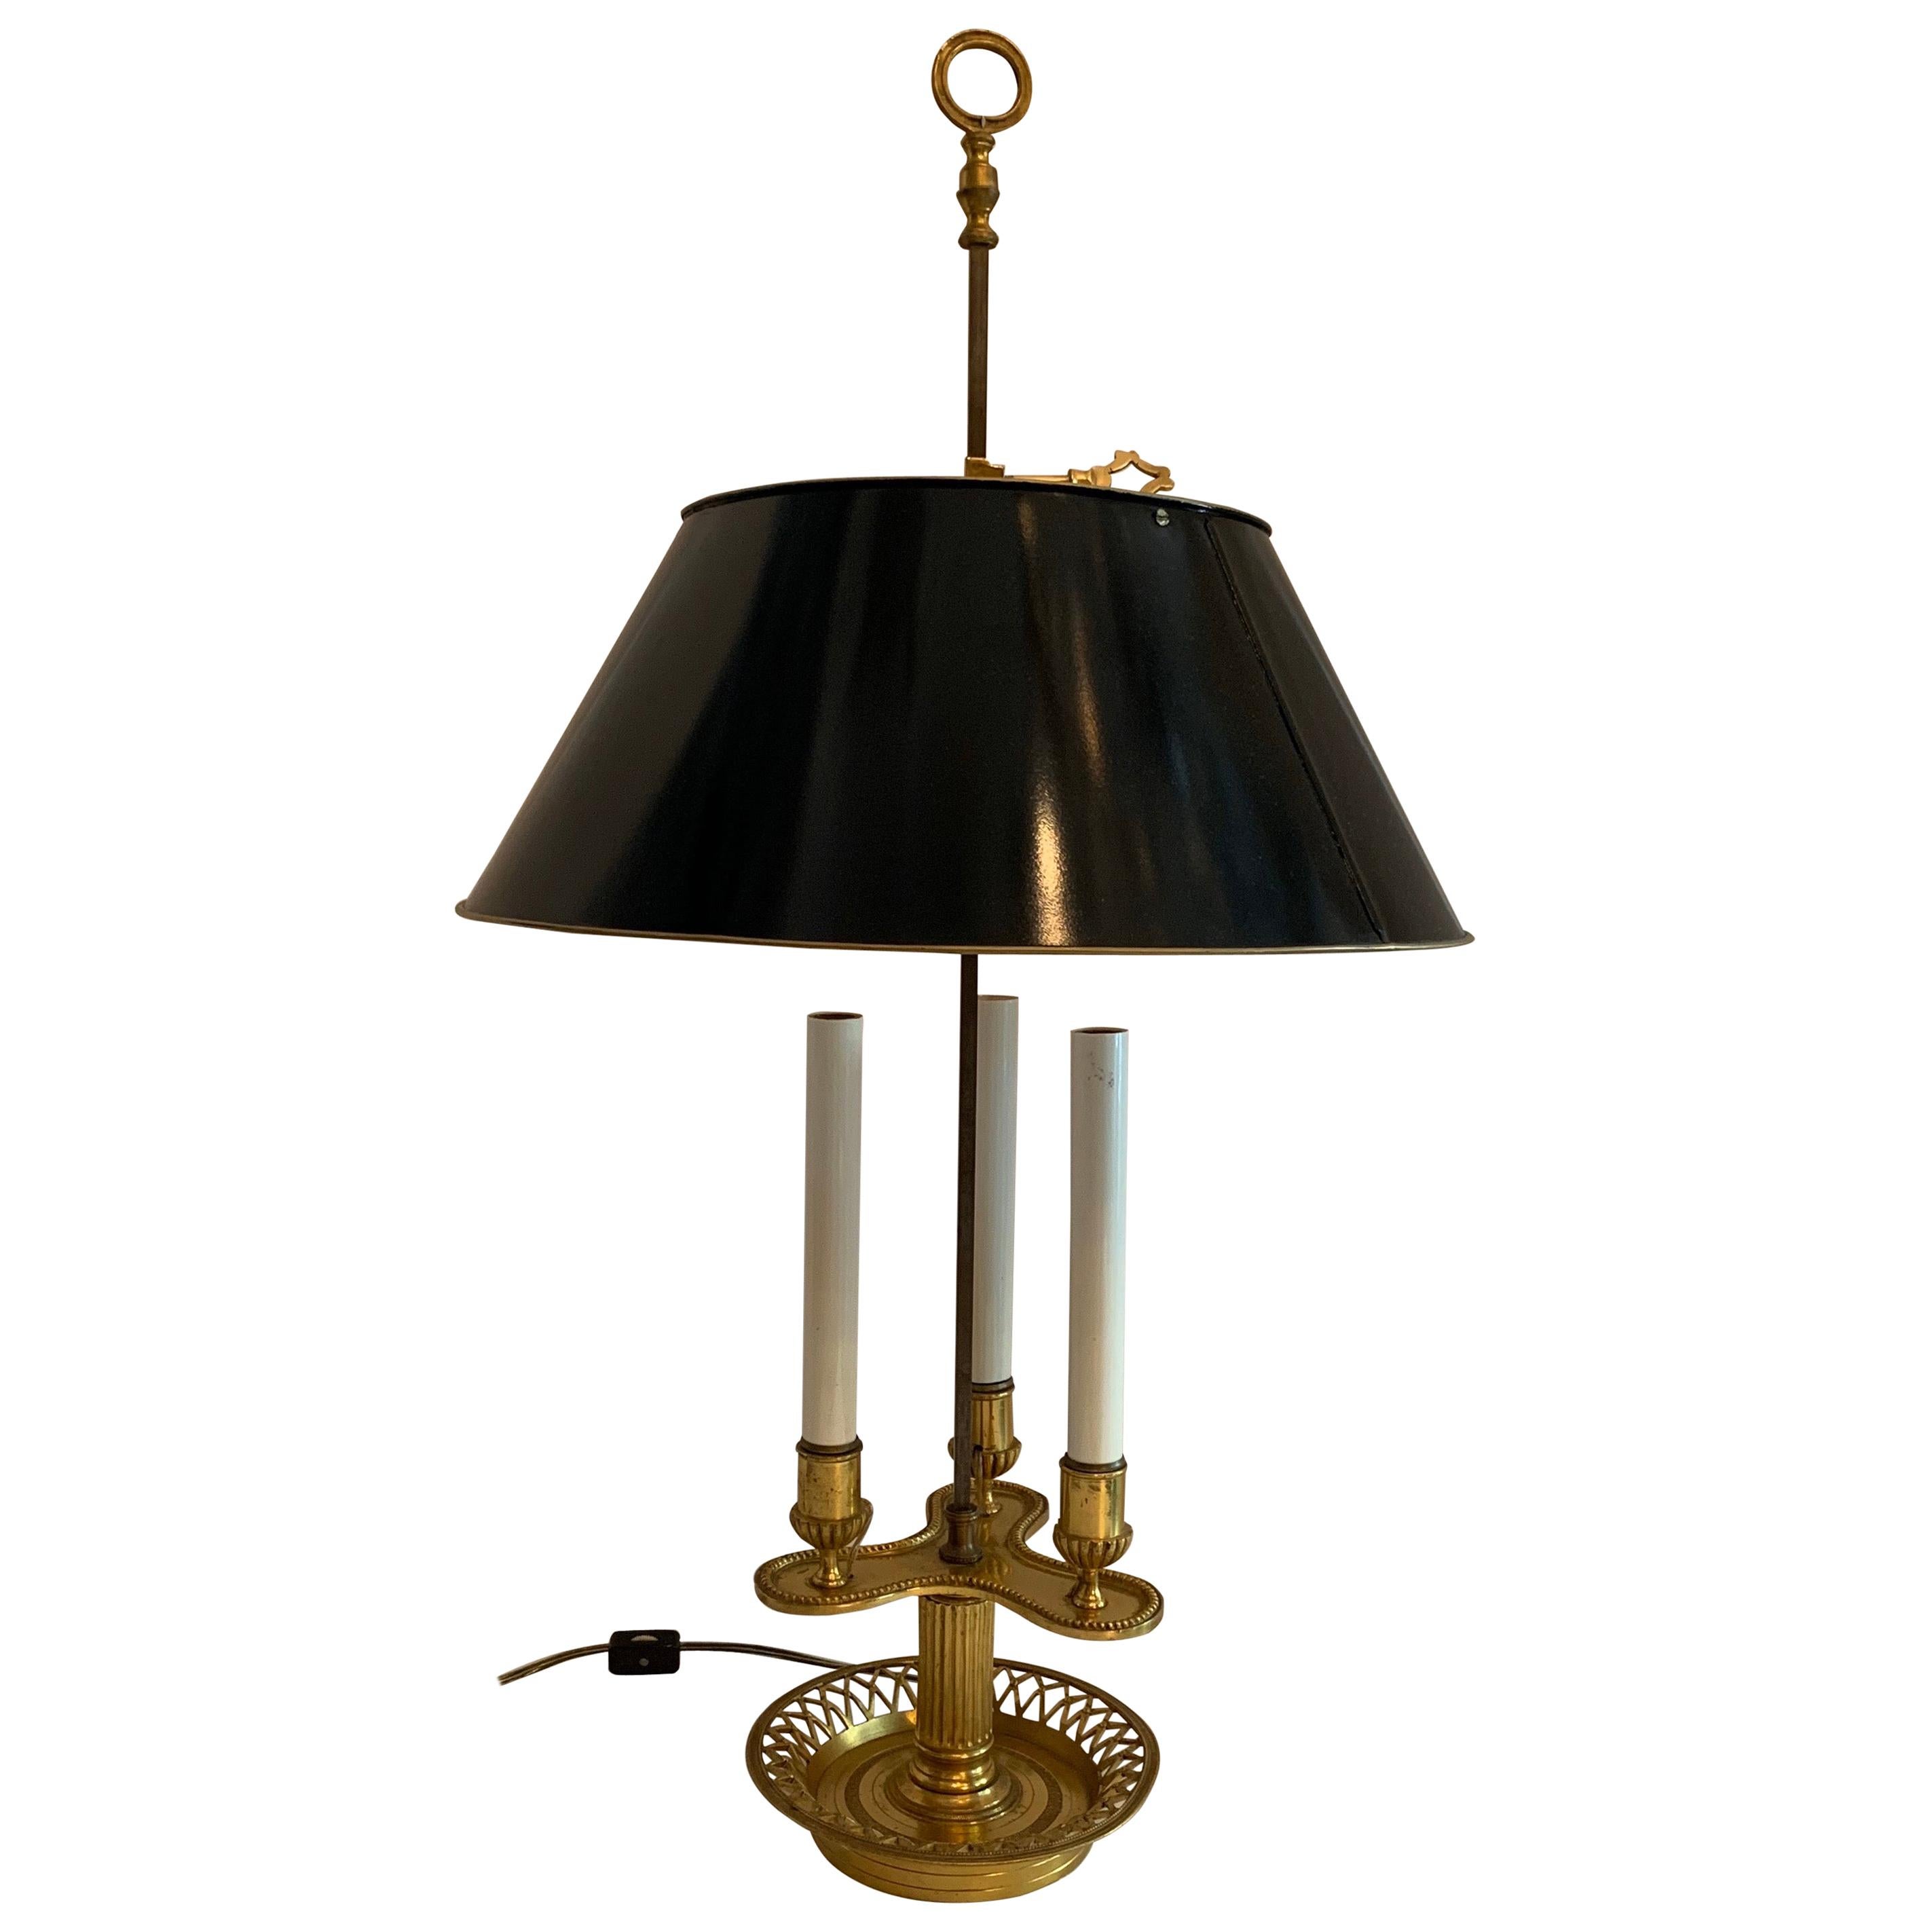 Wonderful French Empire Neoclassical Regency Bronze Patinated Bouillotte Lamp